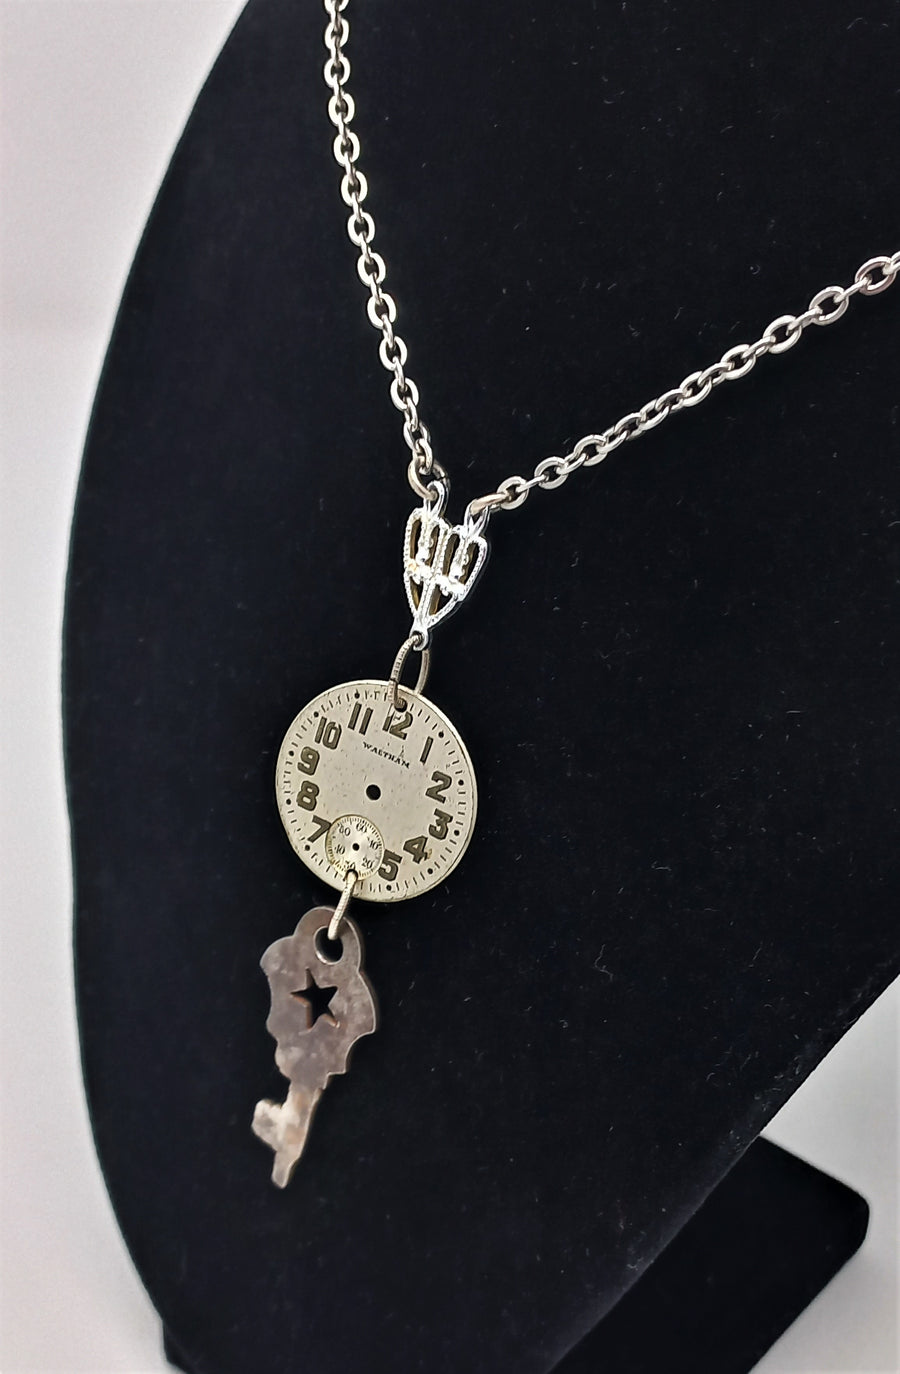 Watch and Key Assemblage Necklace (CSNA3) by Christine Stoll